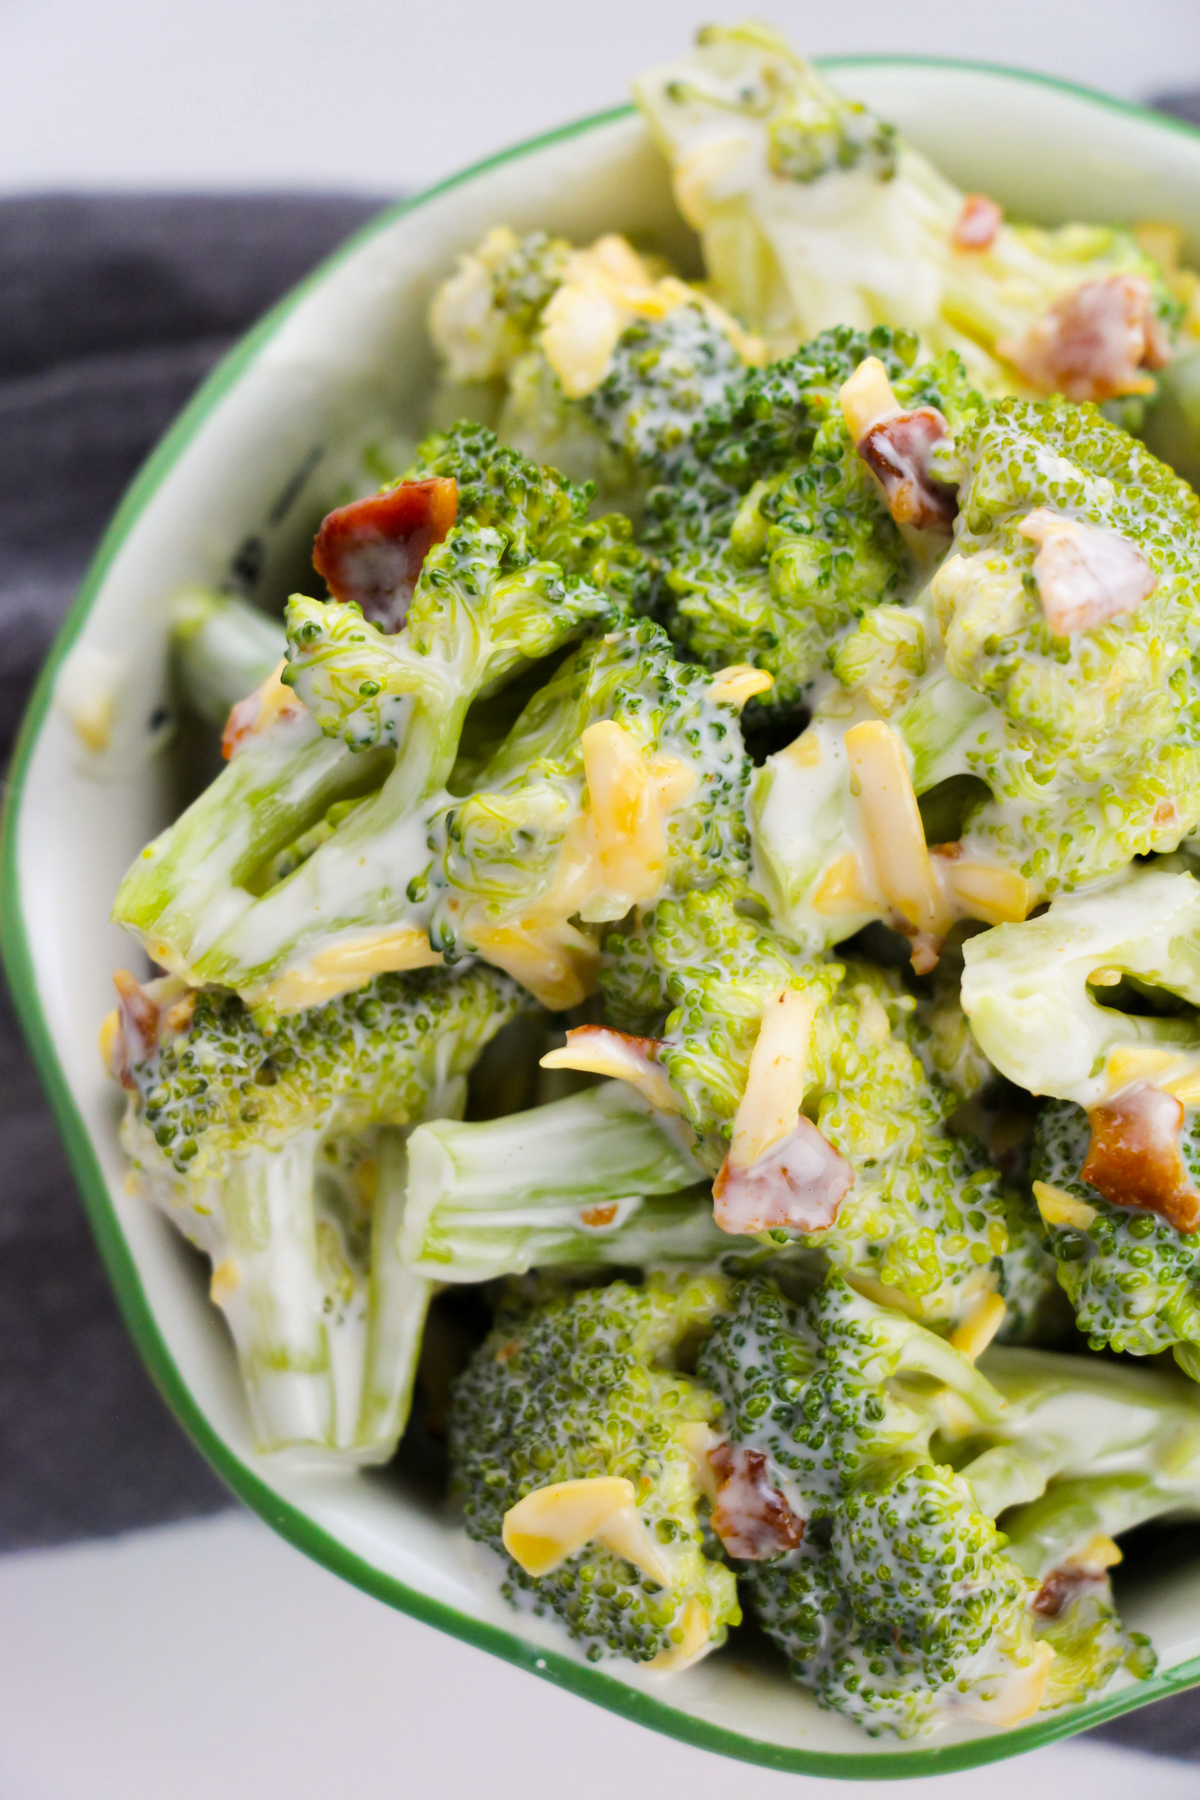 Top-down photo of broccoli salad with crumbled bacon and shredded cheddar cheese.